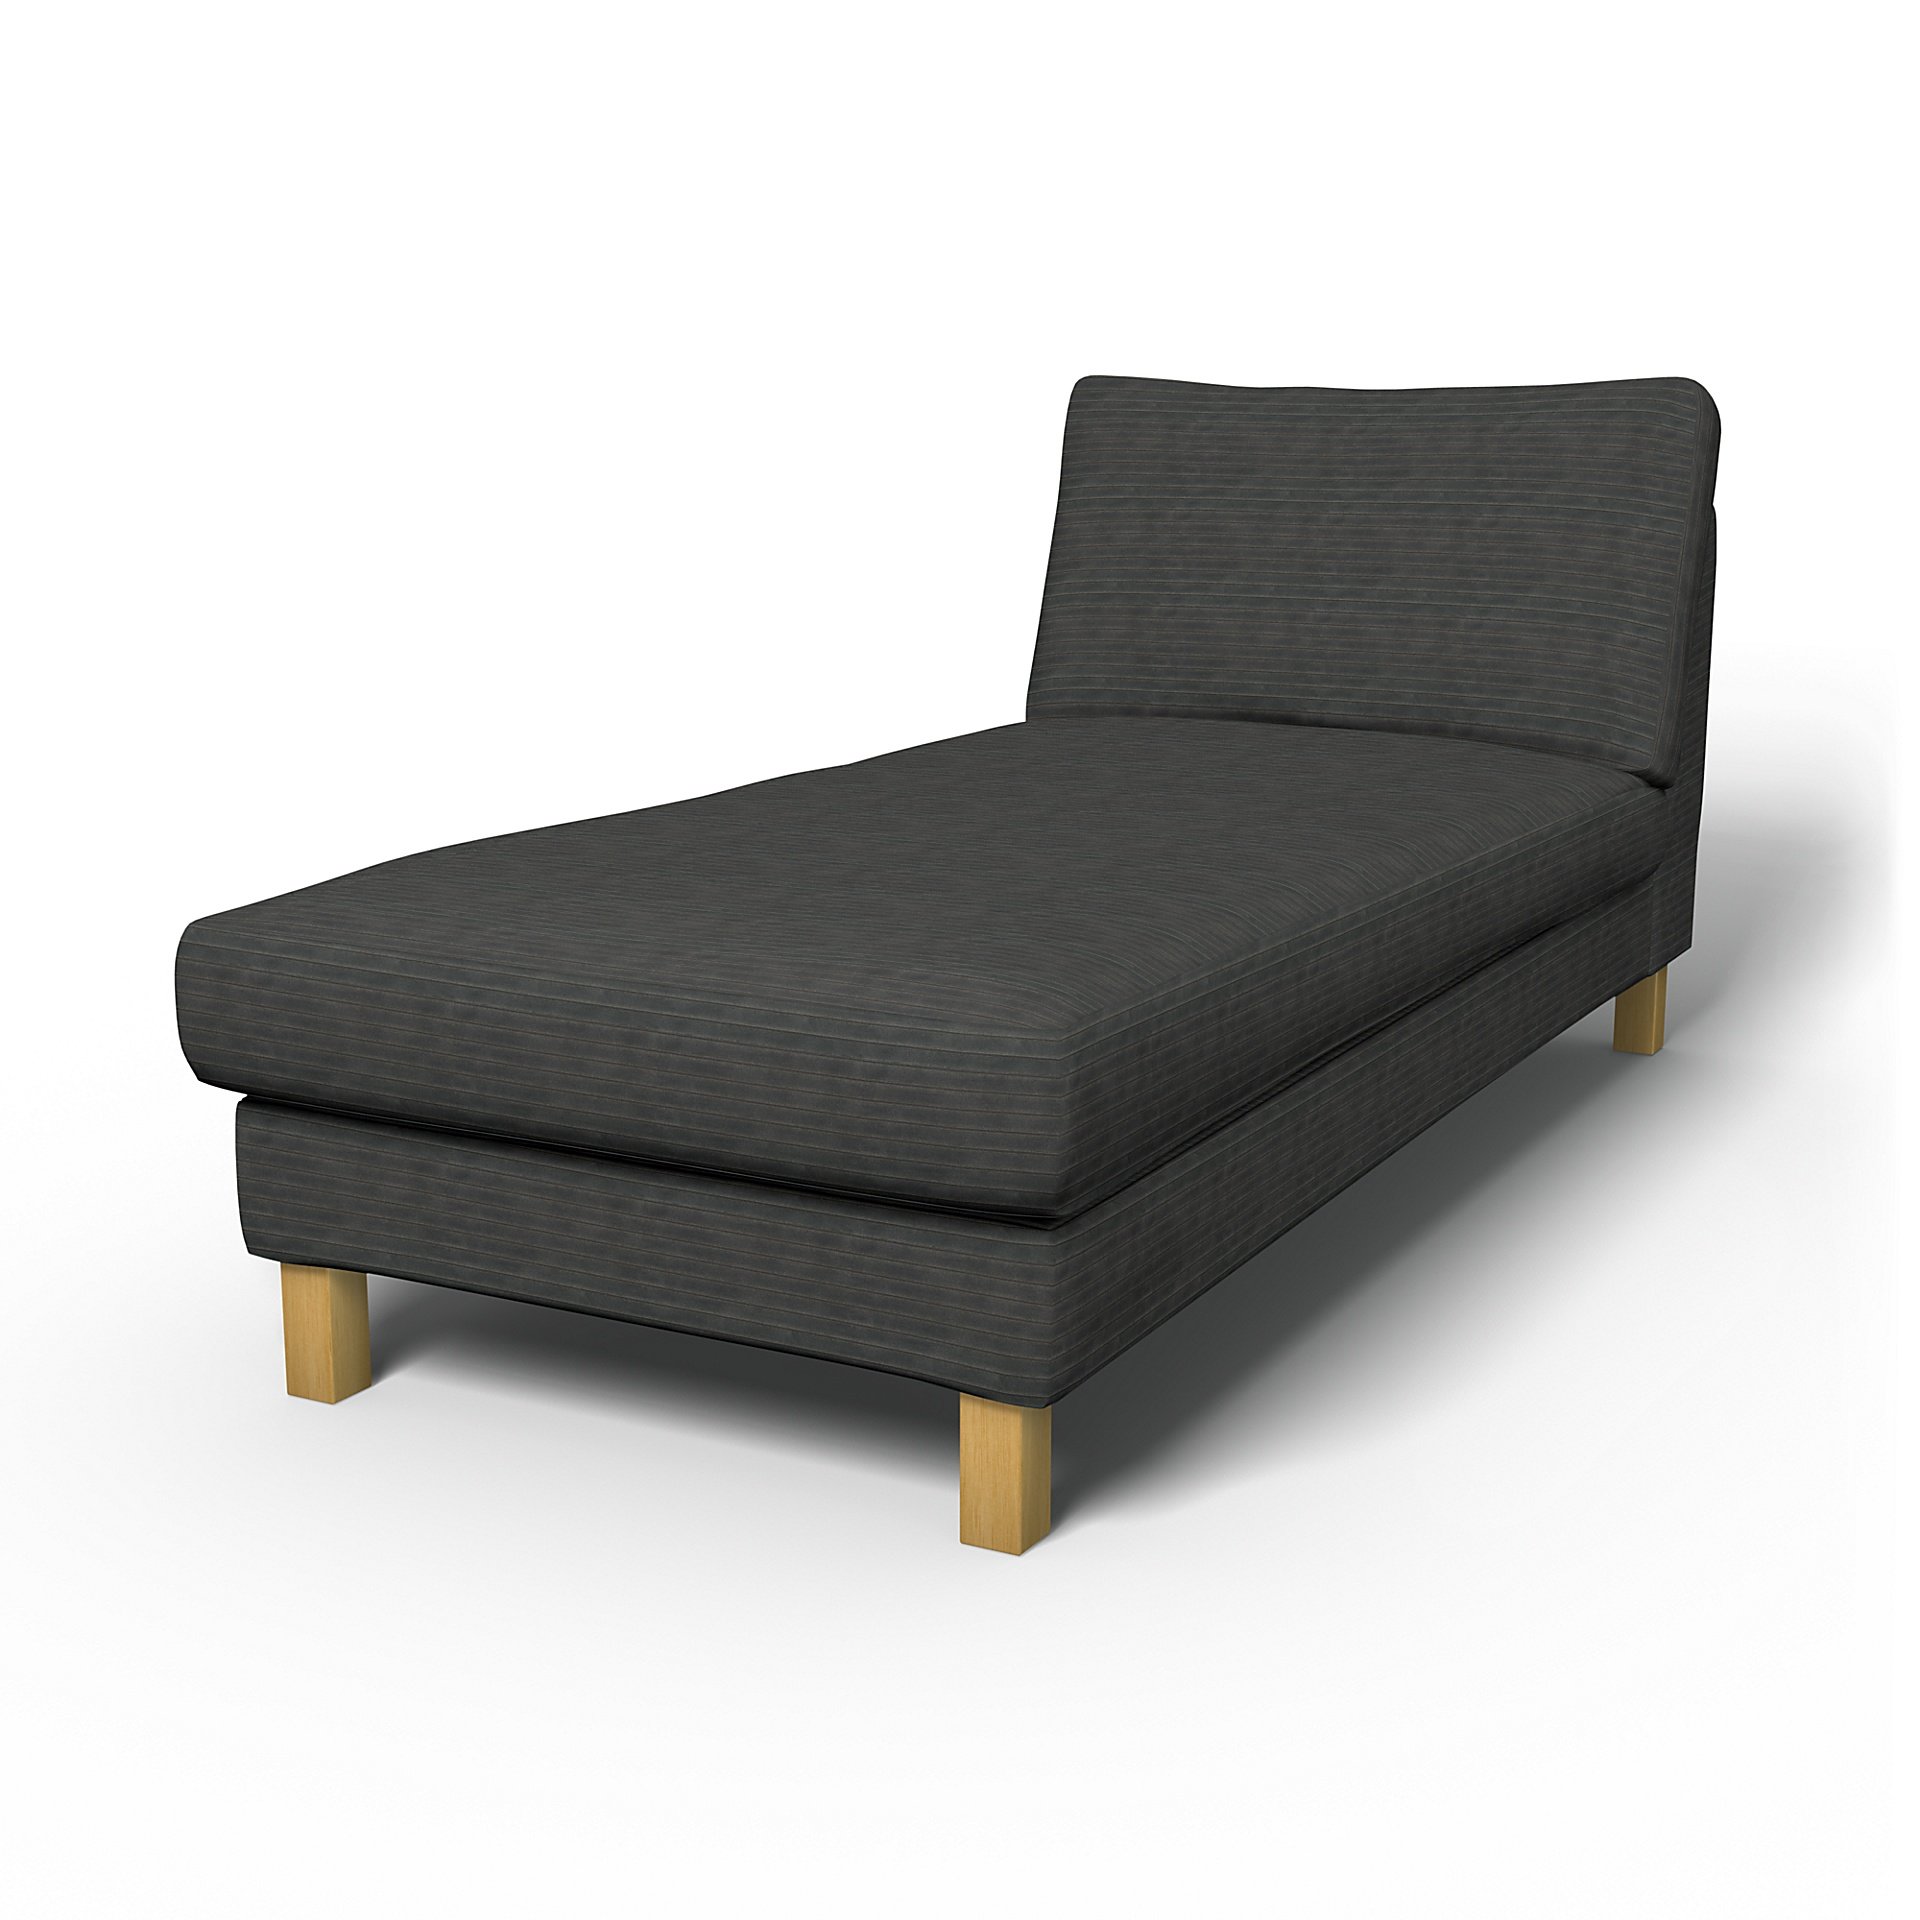 IKEA - Karlstad Stand Alone Chaise Longue Cover, Licorice, Corduroy - Bemz